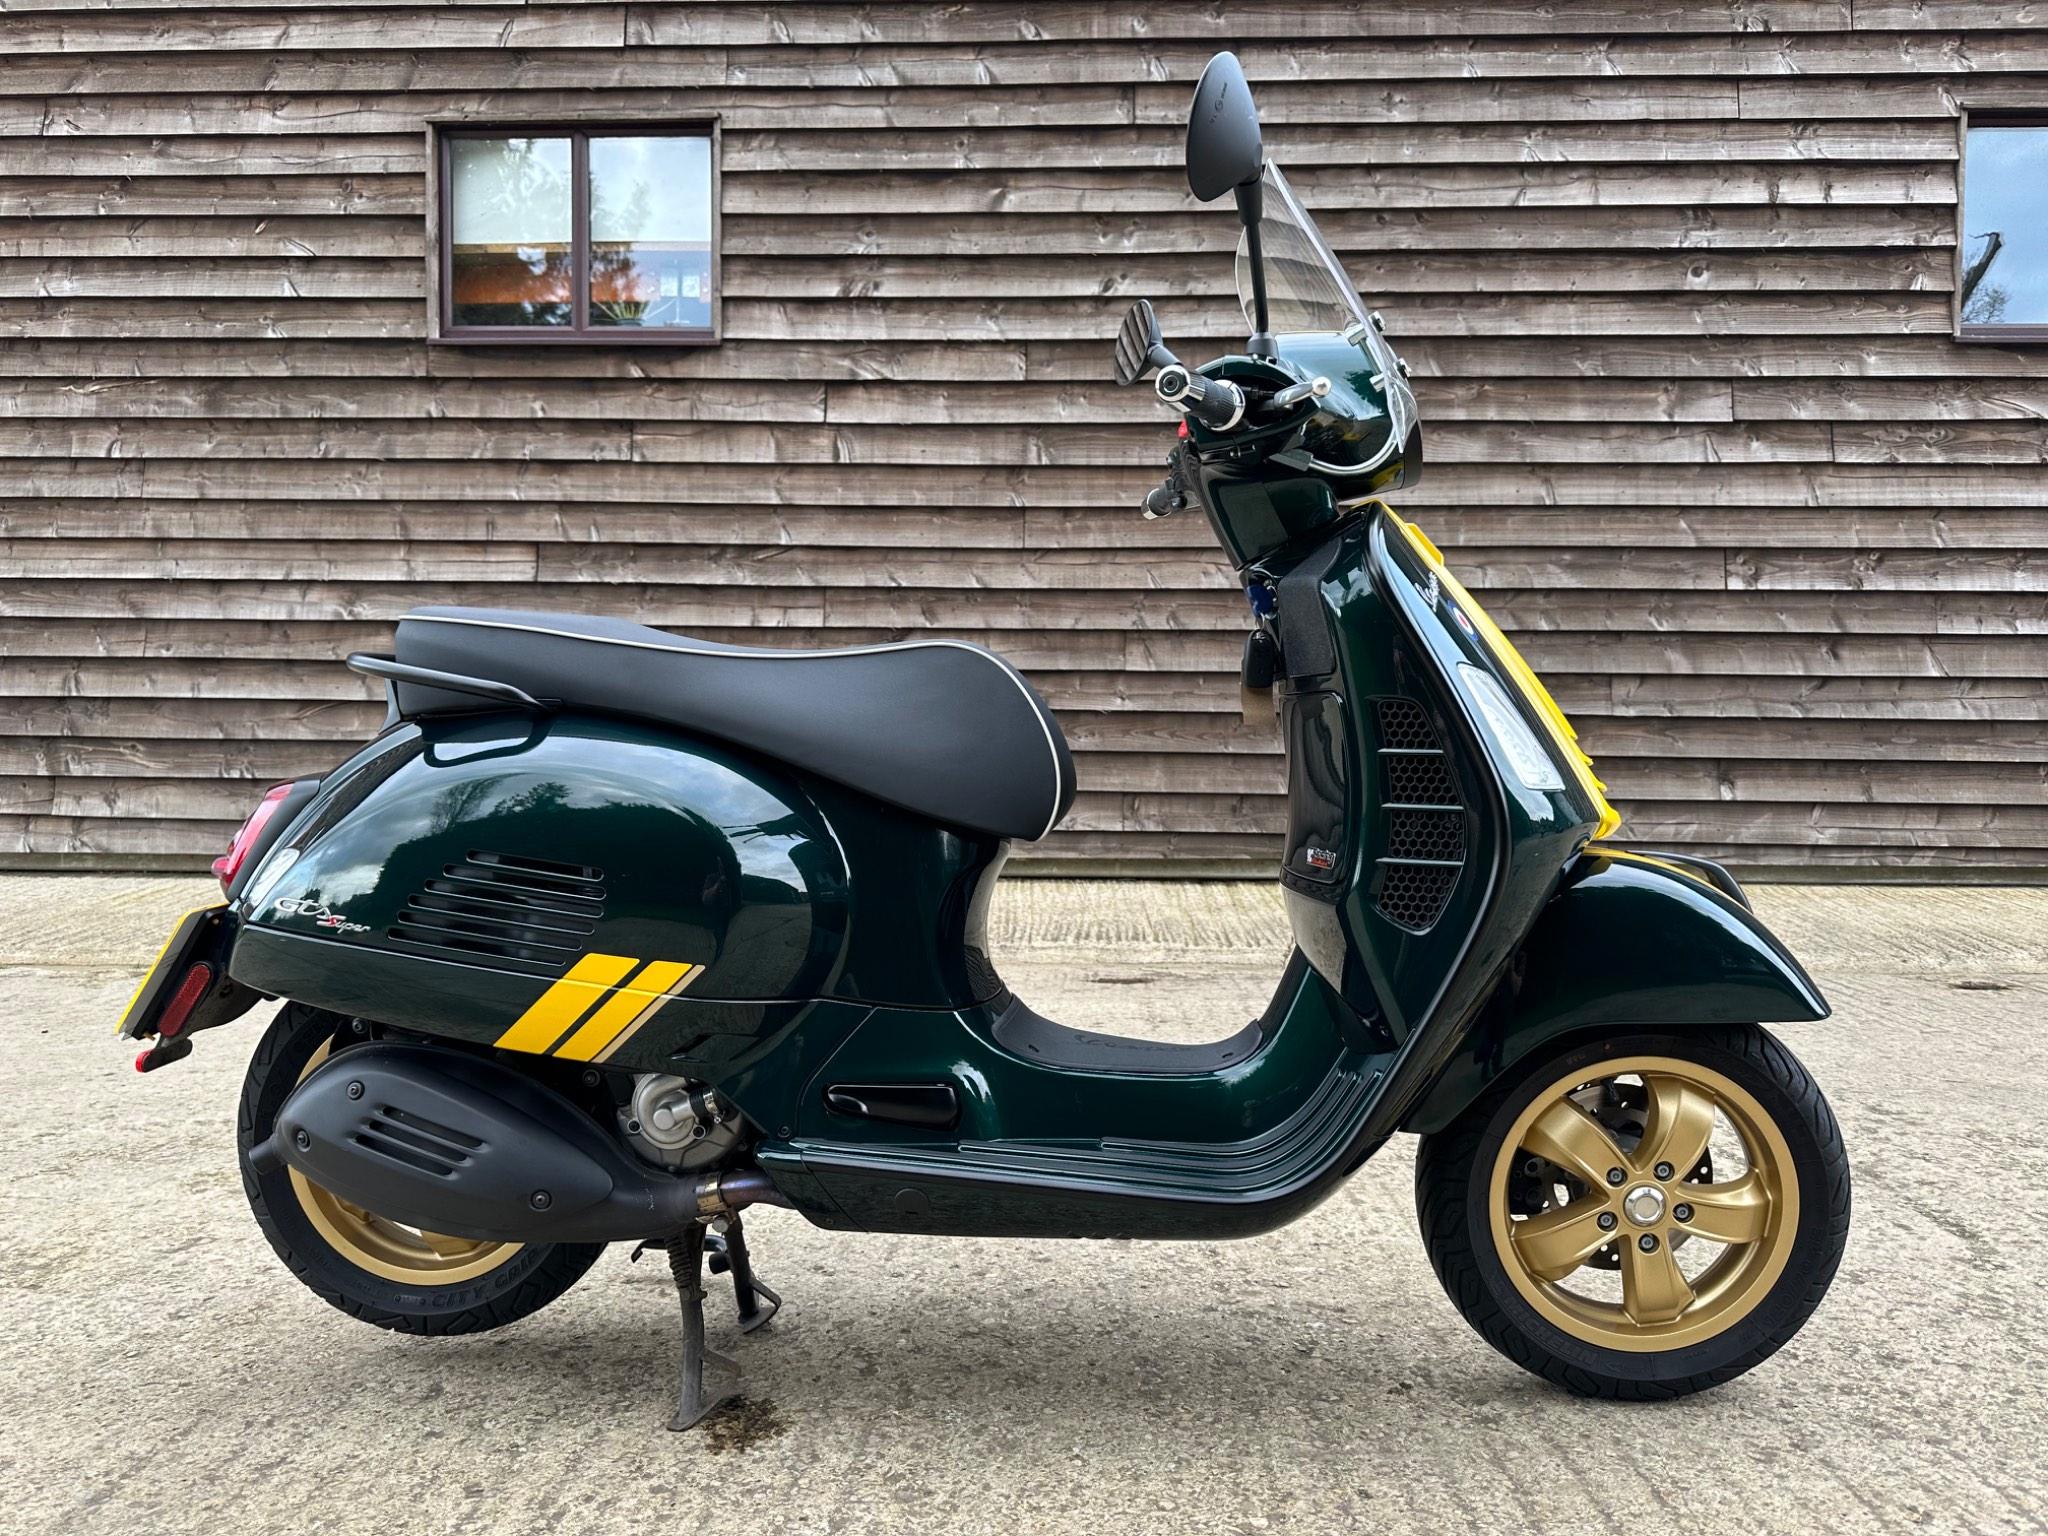 2022 Piaggio Vespa GTS 300 hpe Super Racing Sixties ABS From £91.38 per month 